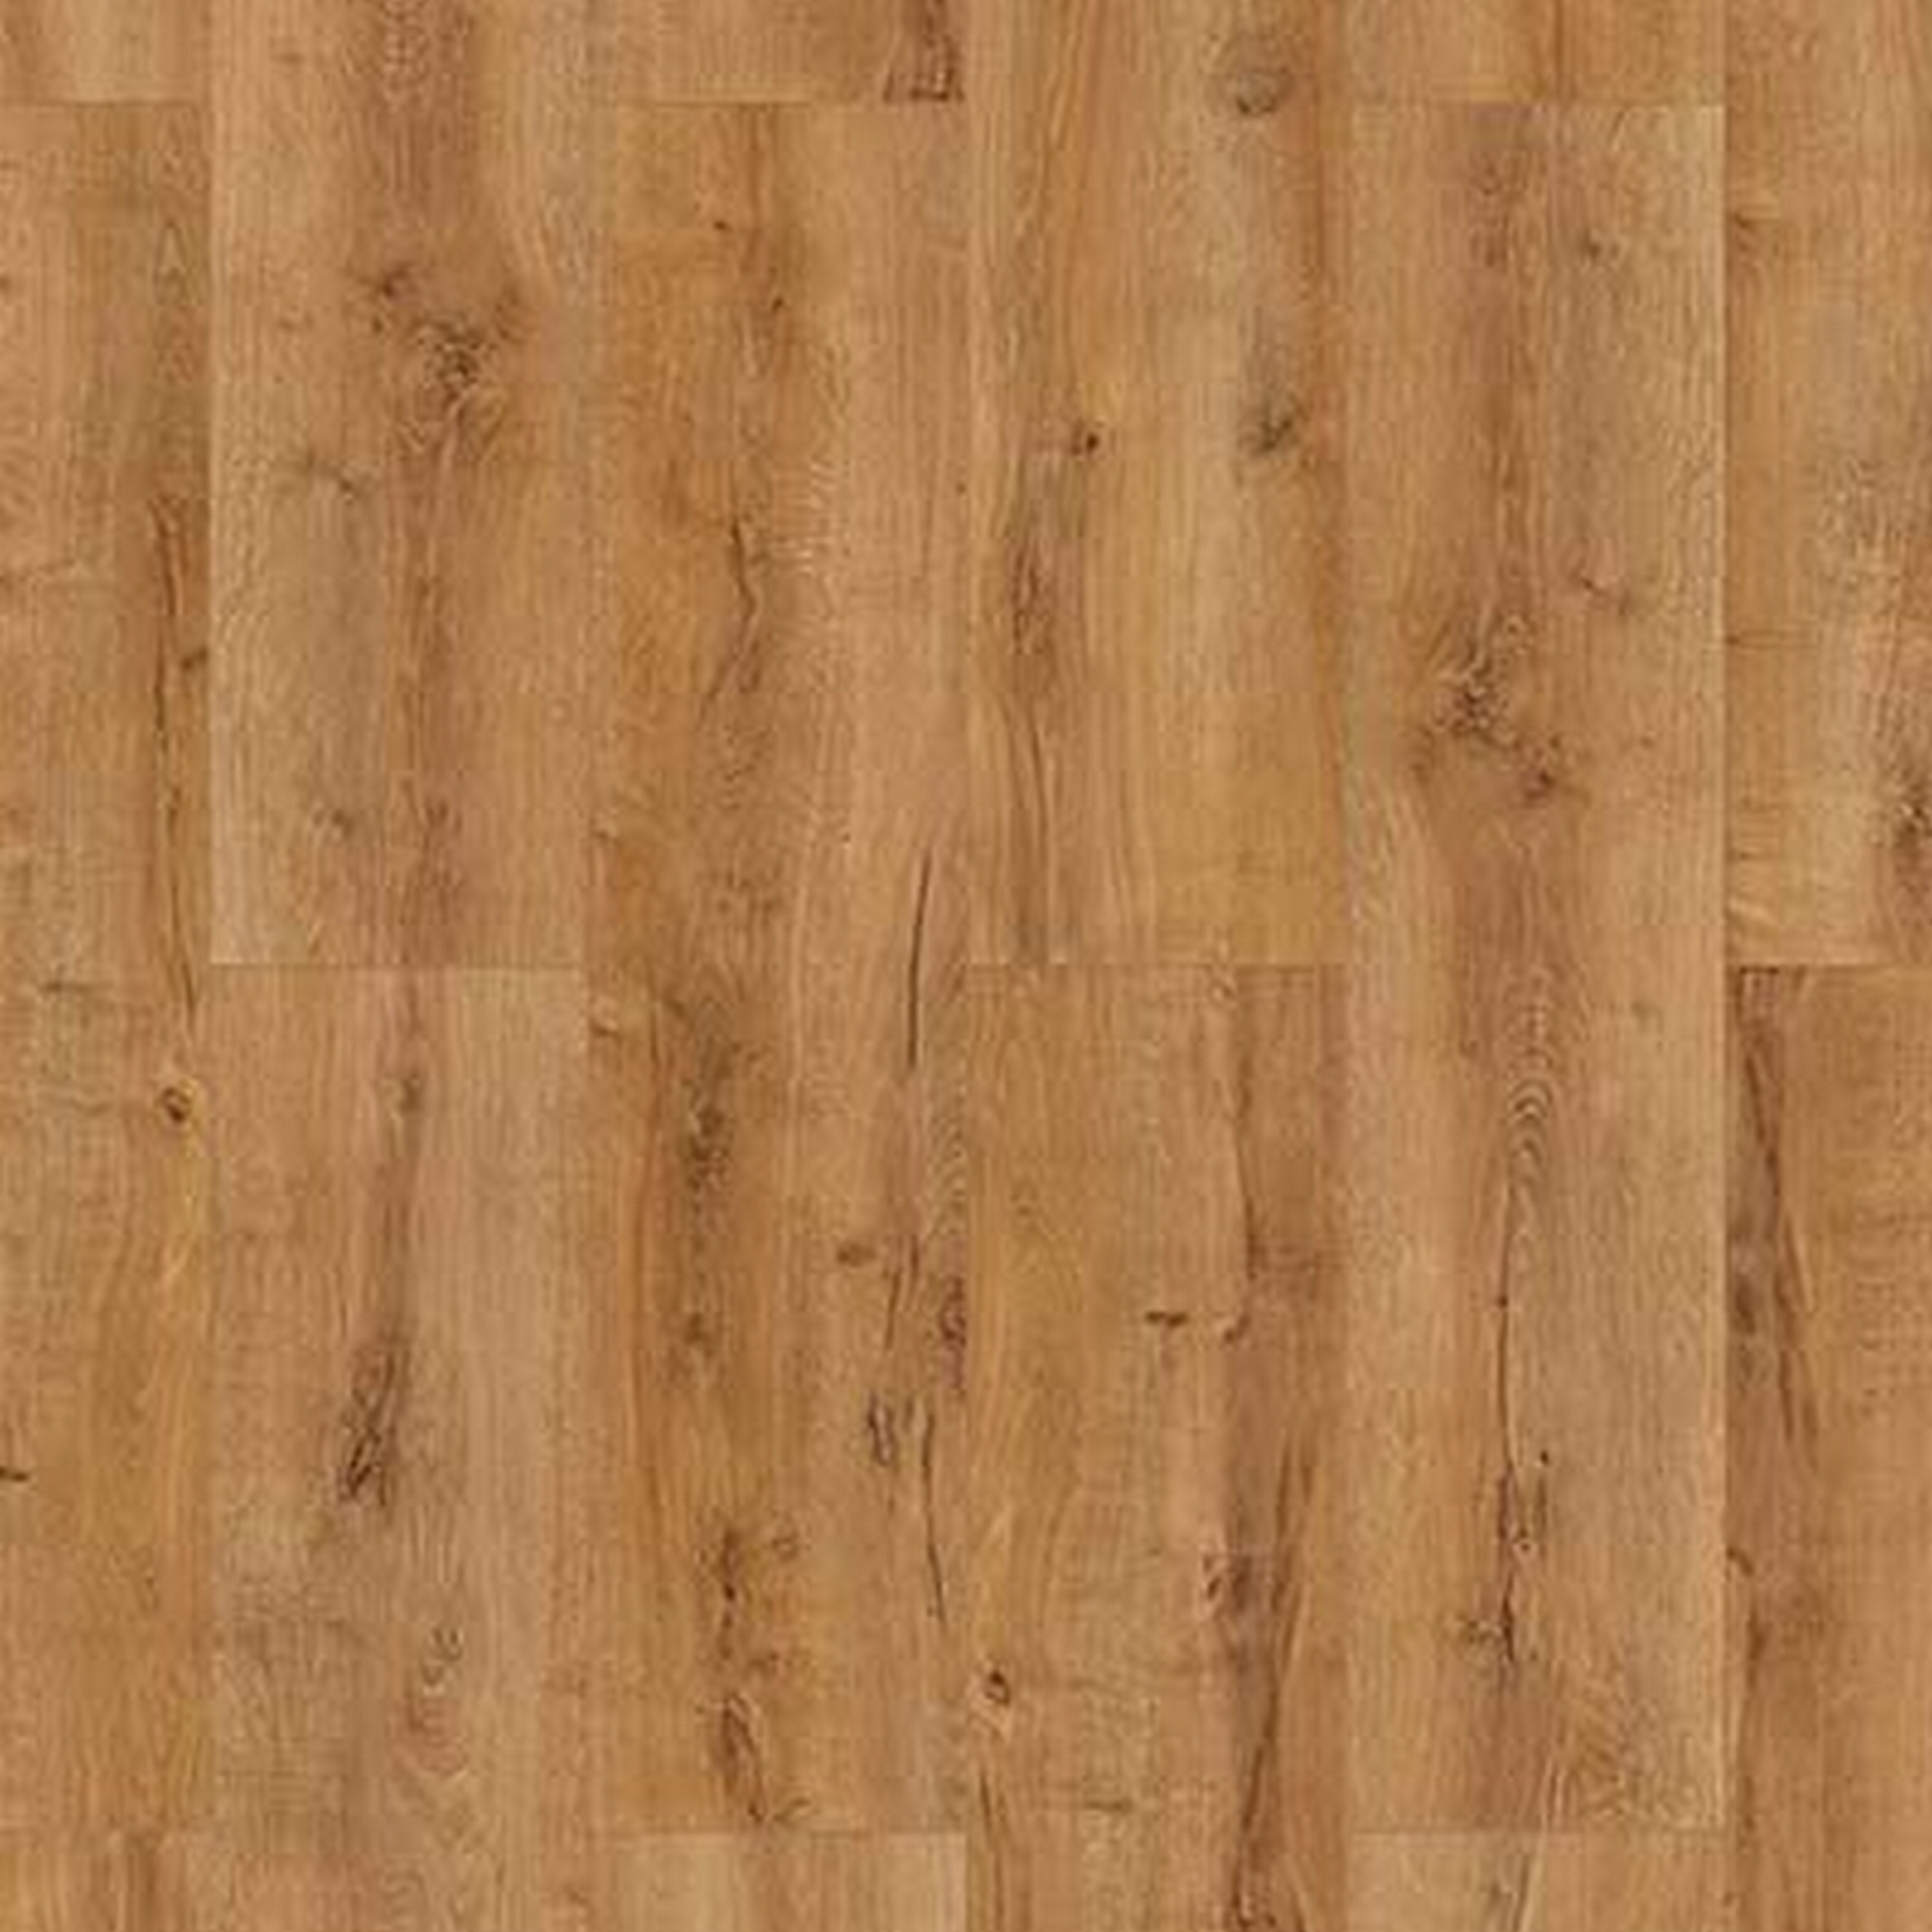 Laminat '832-4 WR' Eiche natur hell 8 mm + product picture